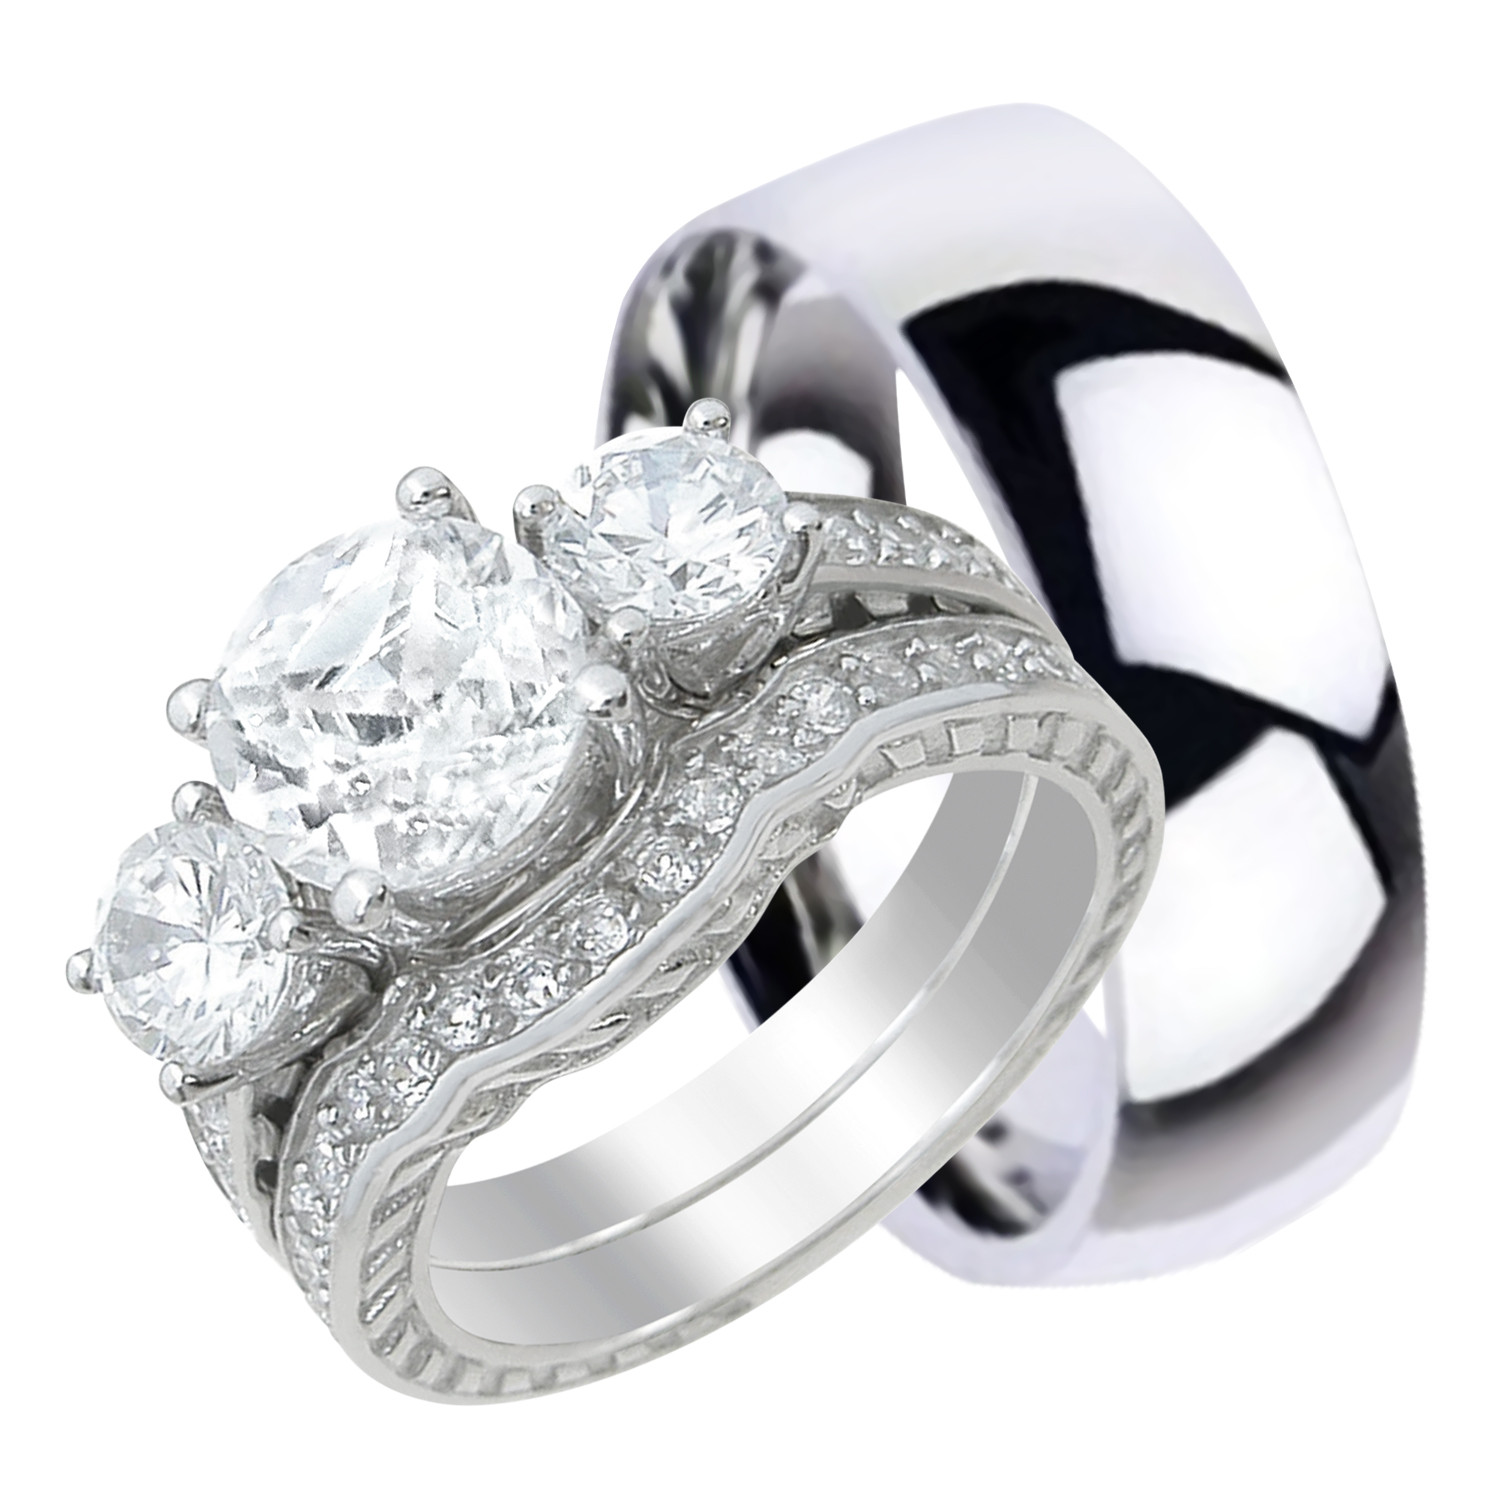 Walmart Wedding Rings Sets For Him And Her
 His and Hers Wedding Ring Sets Matching Silver Titanium